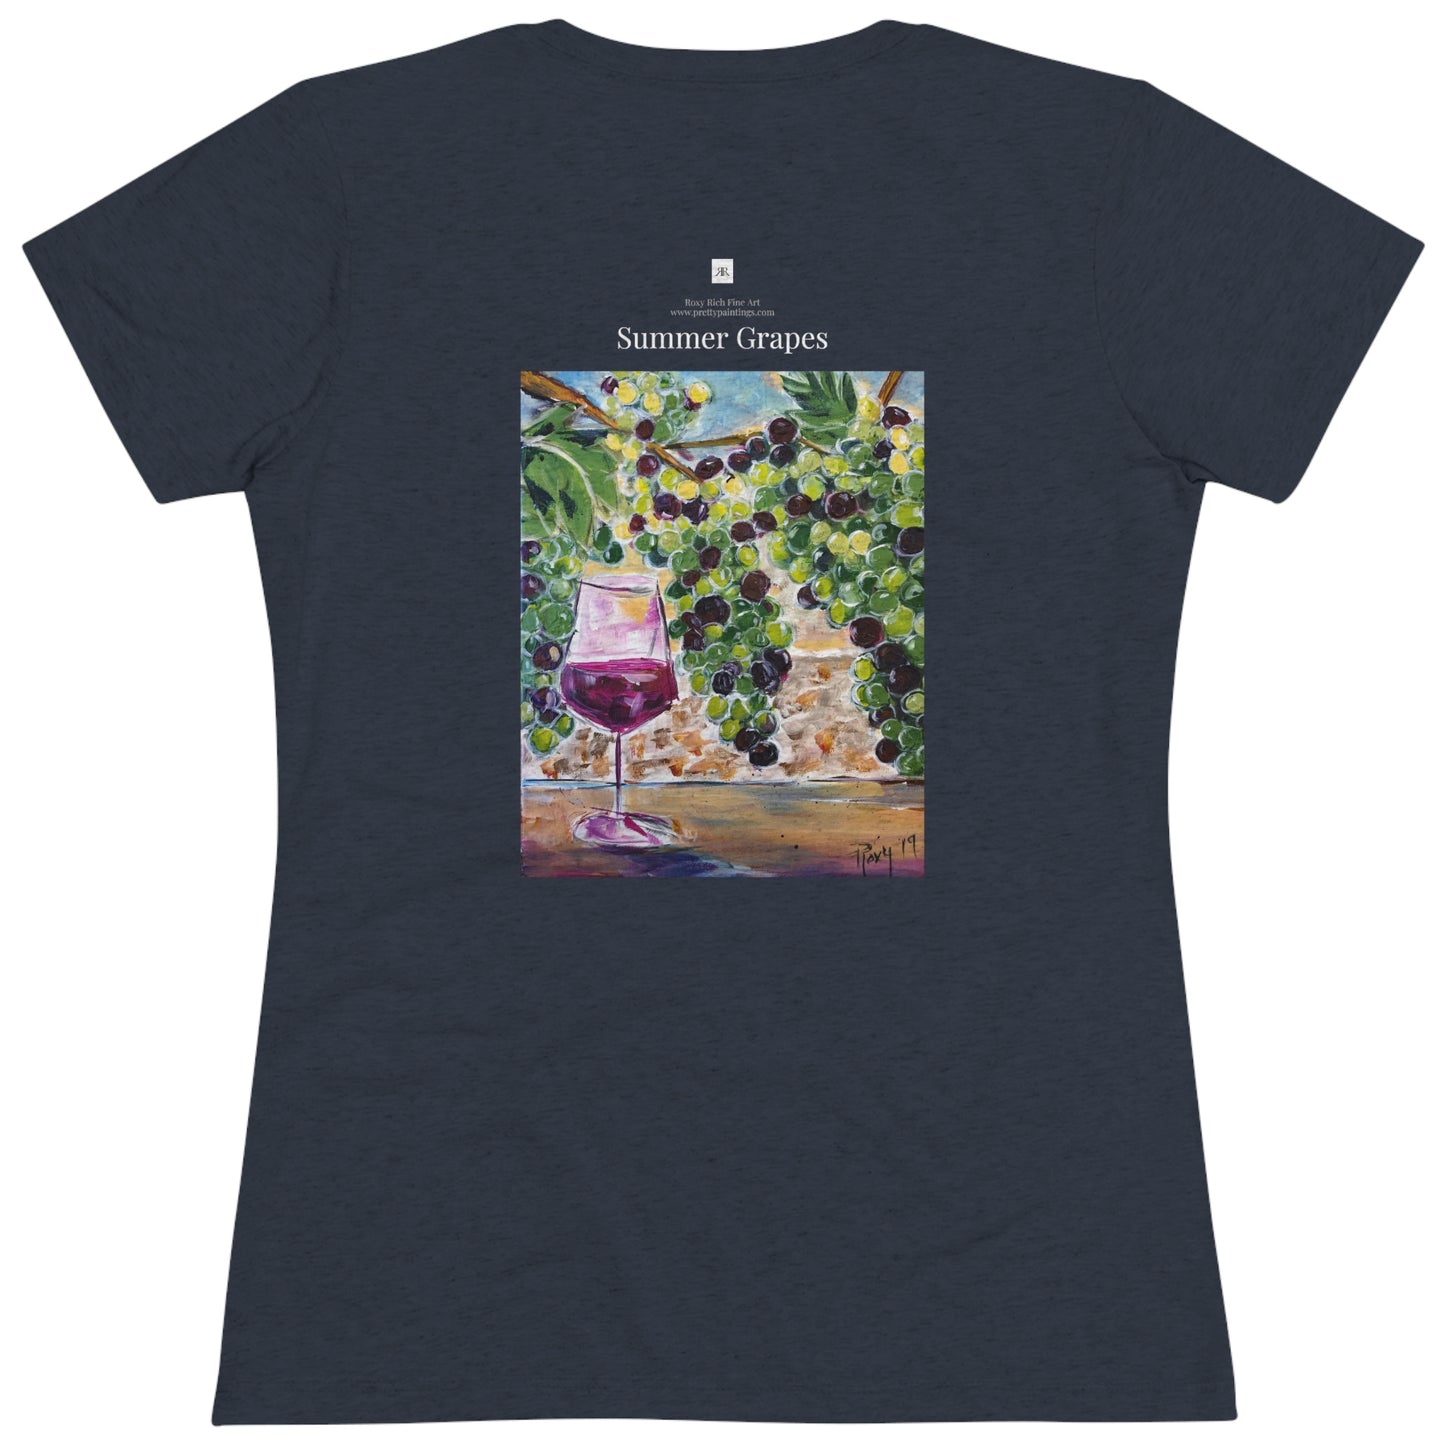 Summer Grapes (image on back) Temecula Women's fitted Triblend Tee  tee shirt